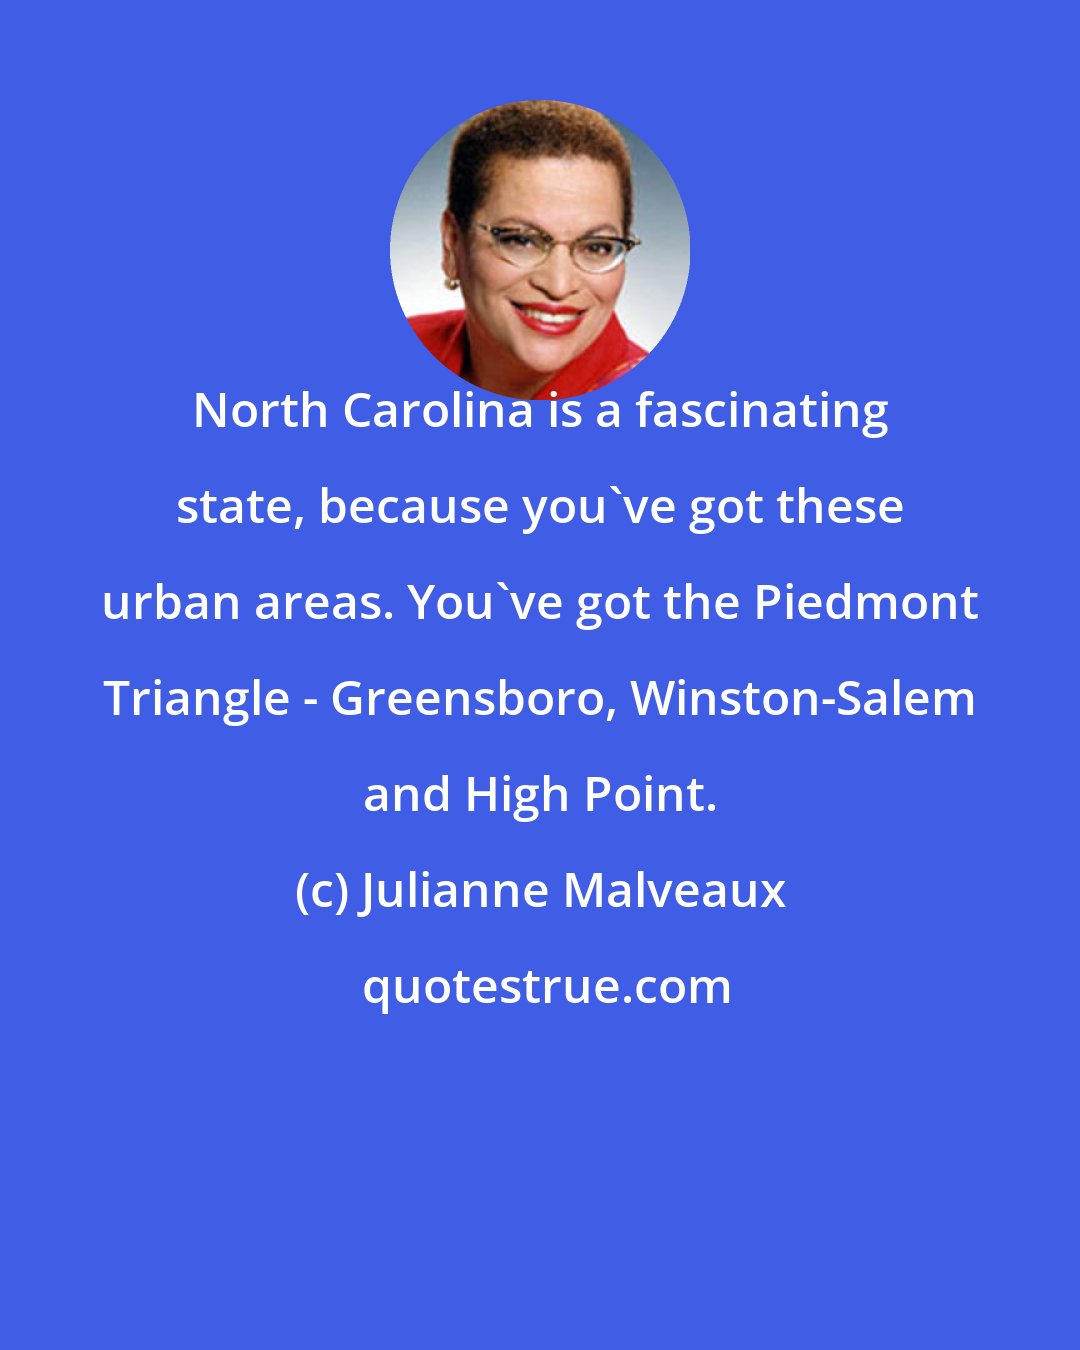 Julianne Malveaux: North Carolina is a fascinating state, because you've got these urban areas. You've got the Piedmont Triangle - Greensboro, Winston-Salem and High Point.